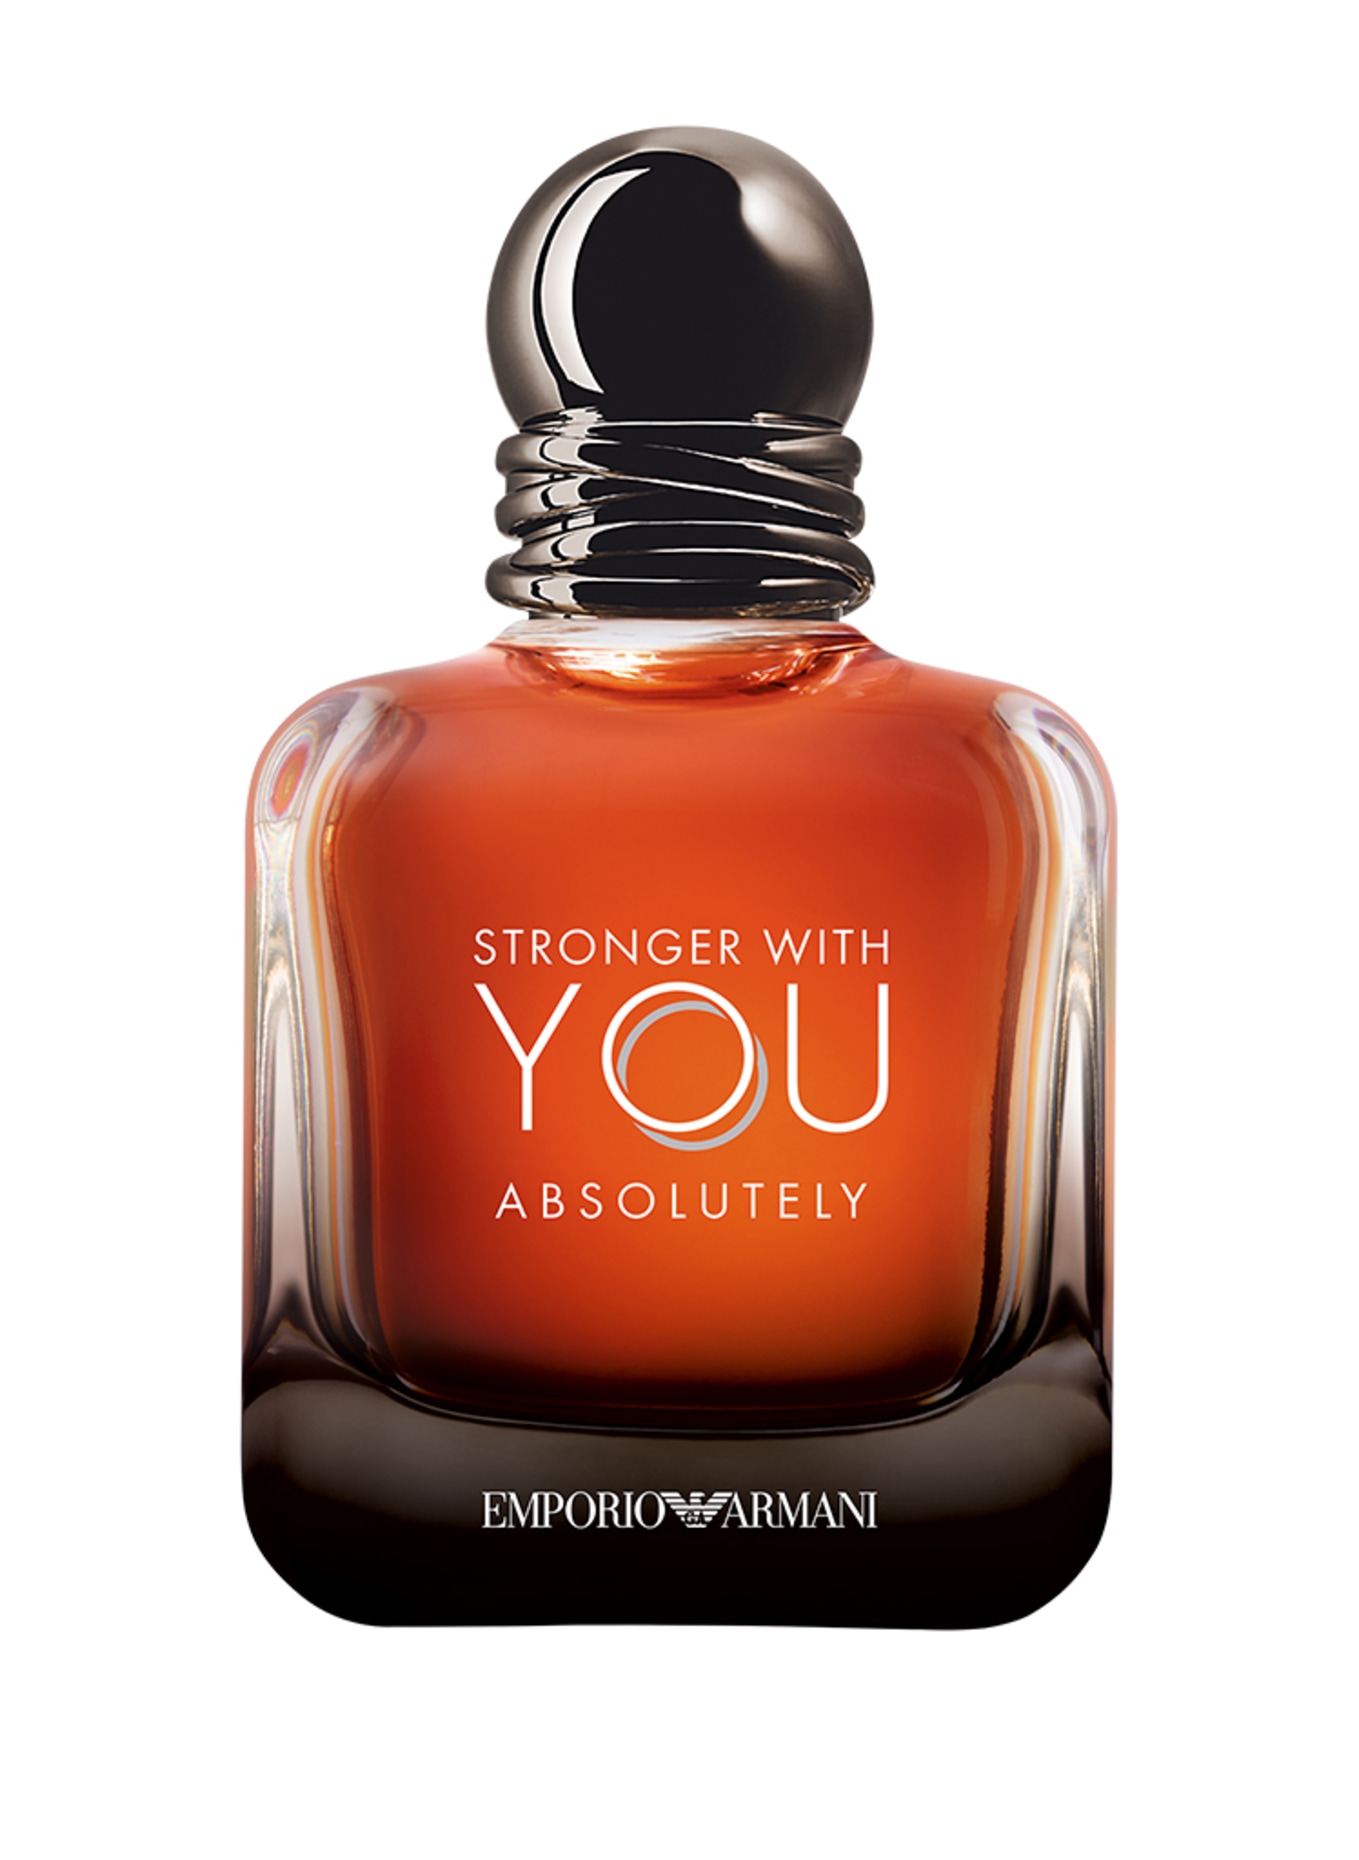 EMPORIO ARMANI STRONGER WITH YOU ABSOLUTELY (Obrazek 1)